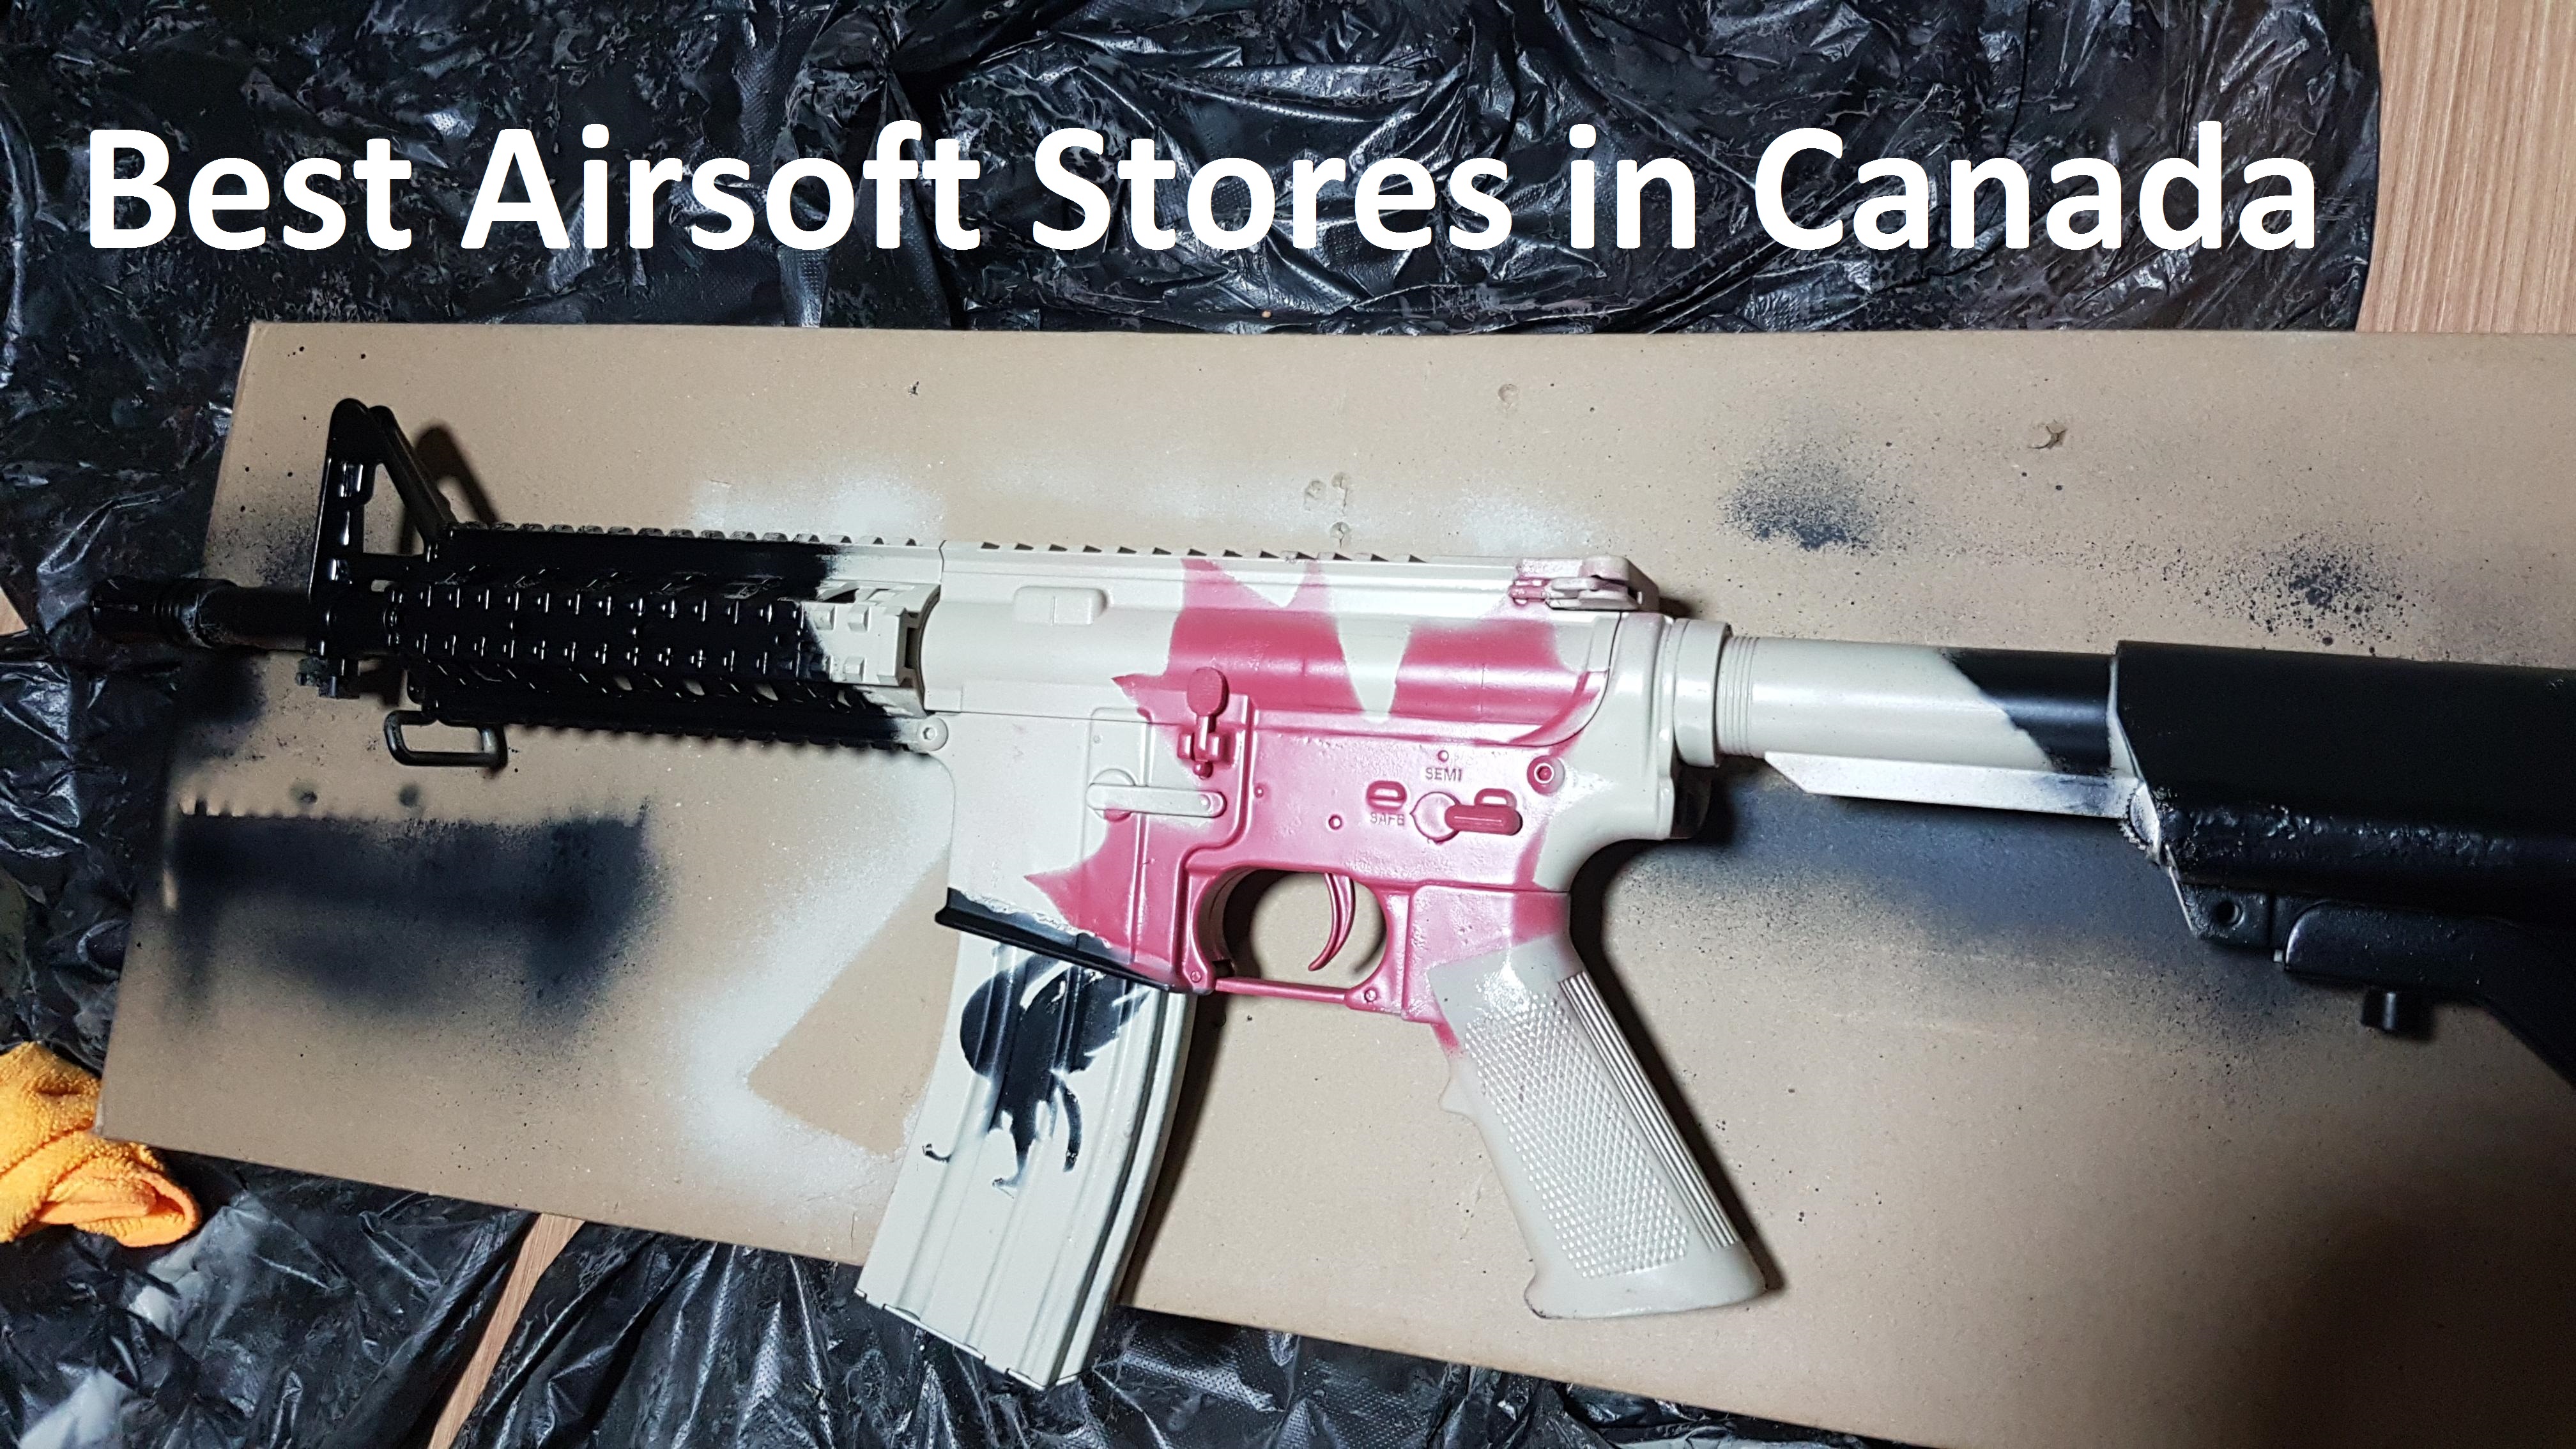 Airsoft Stores in Canada